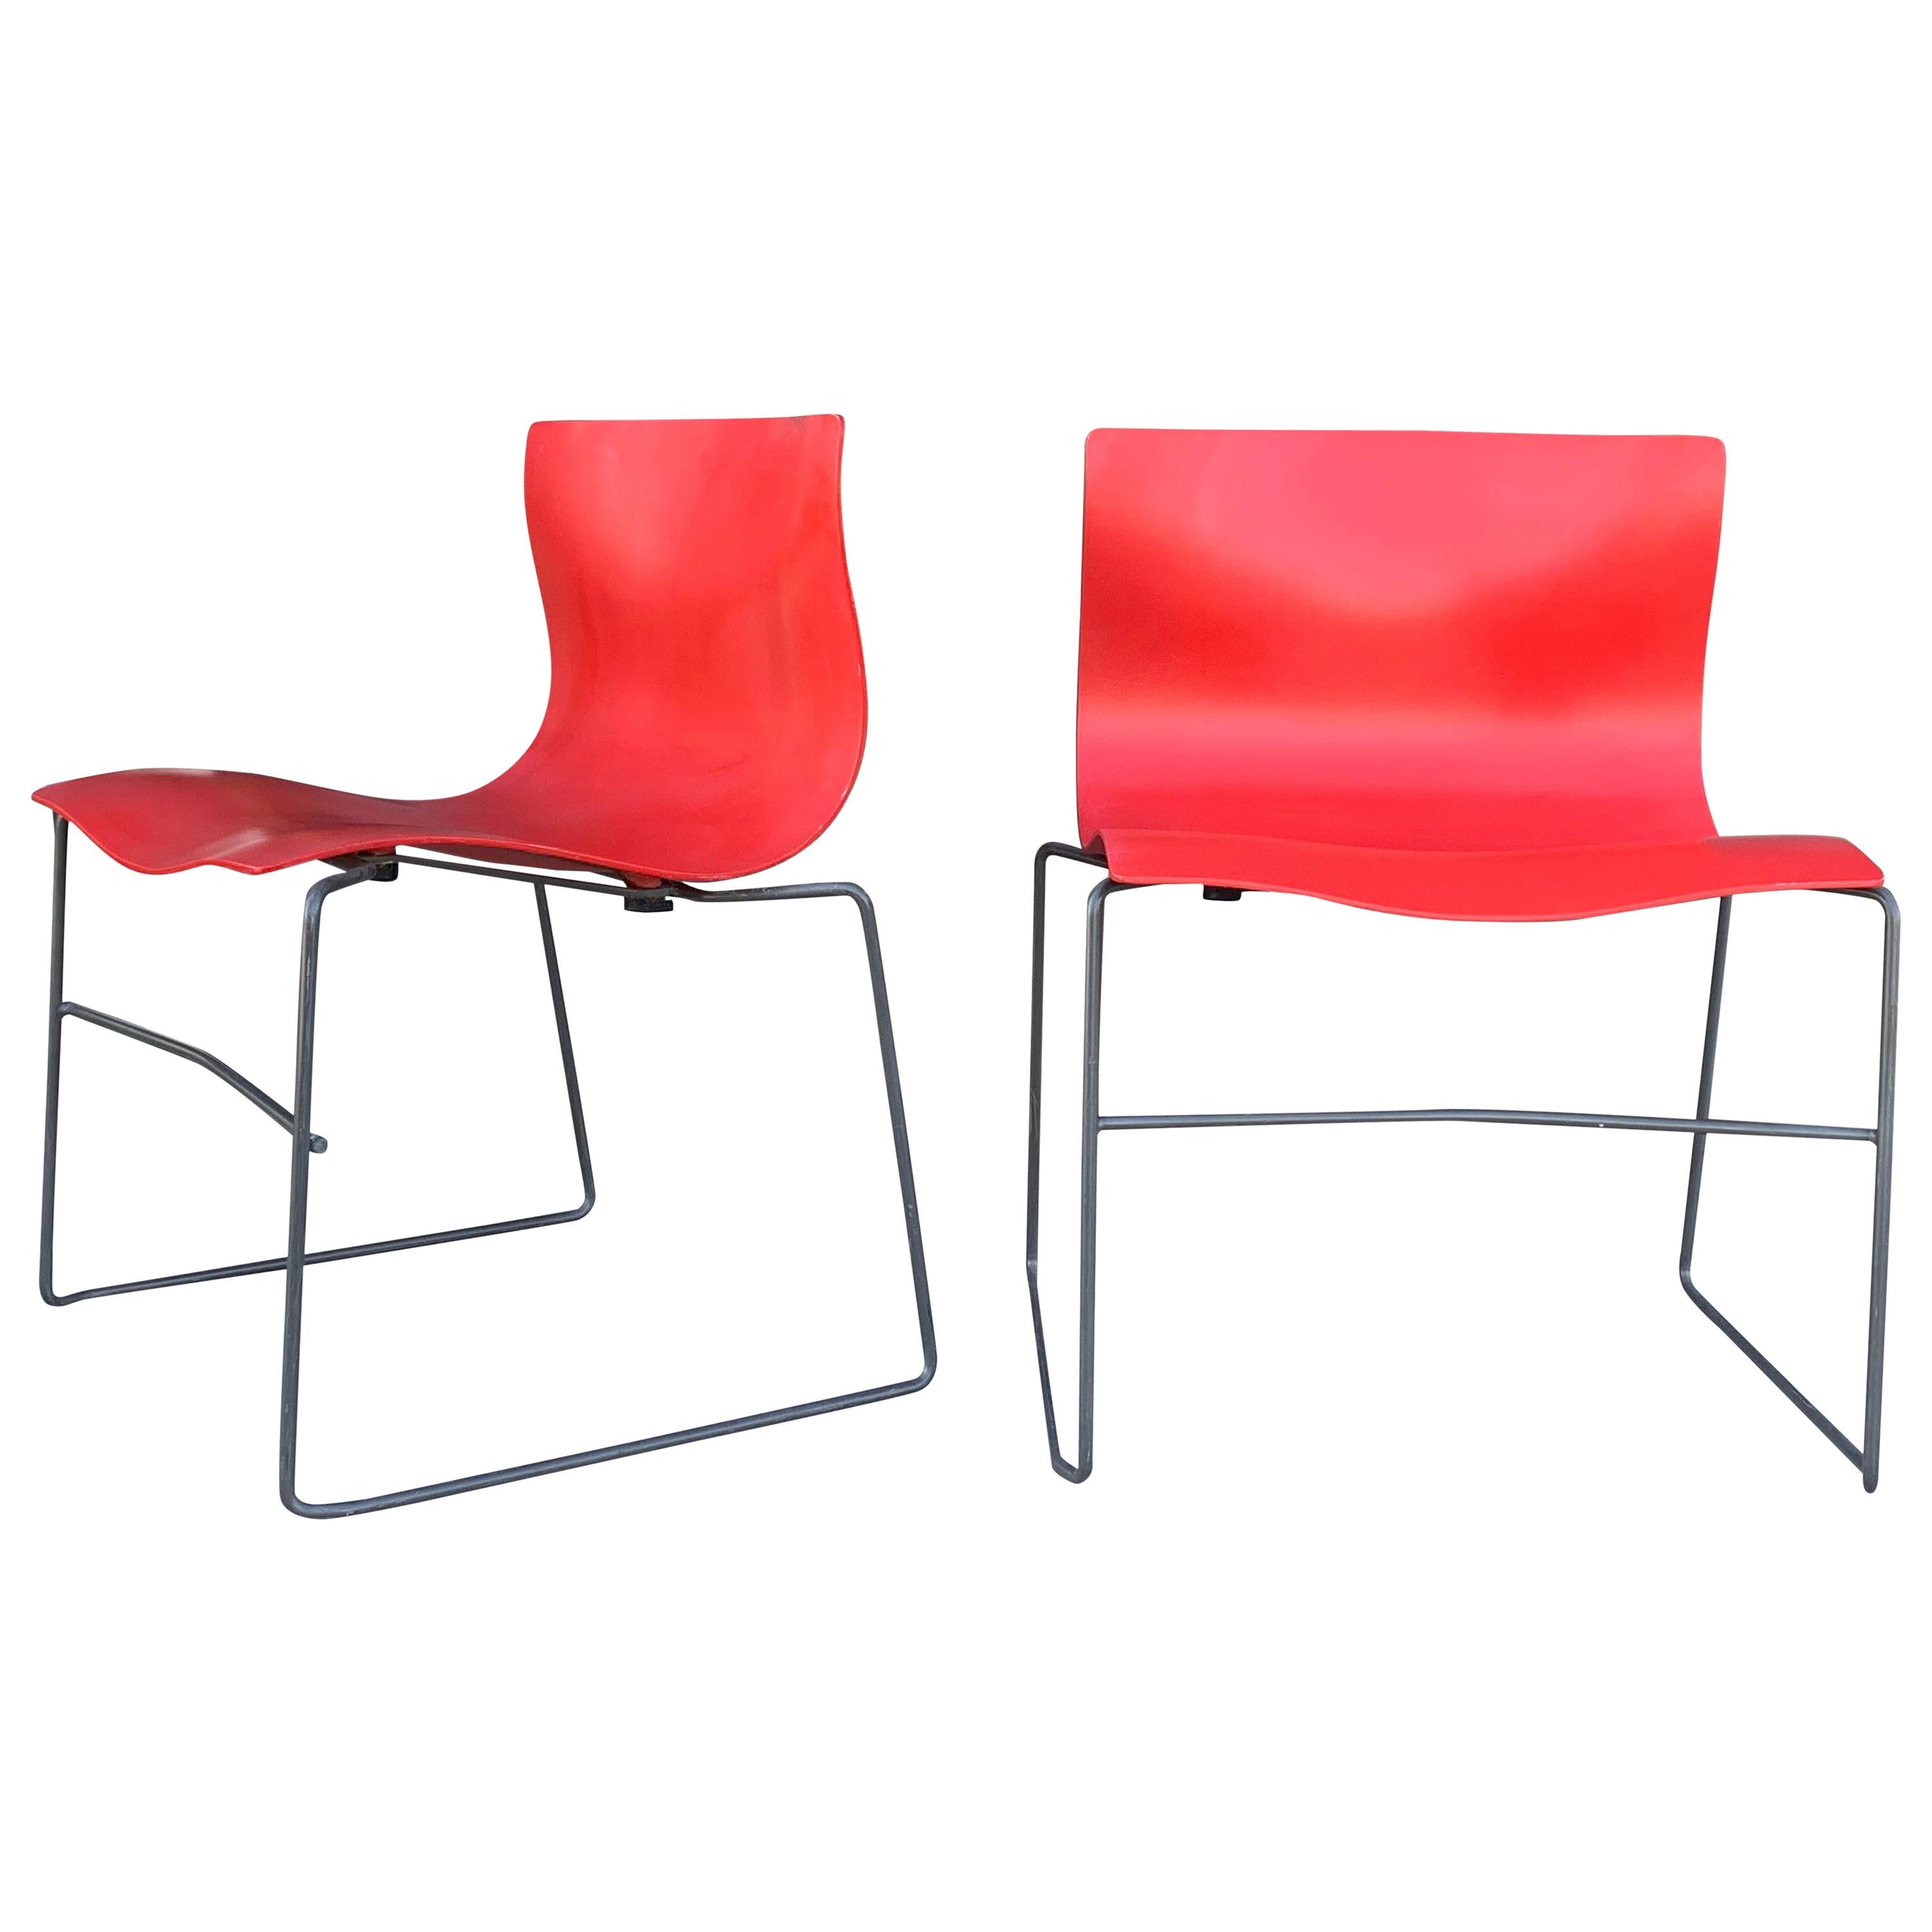 Pair of Rare Red Handkerchief Chairs by Massimo Vignelli, 1985